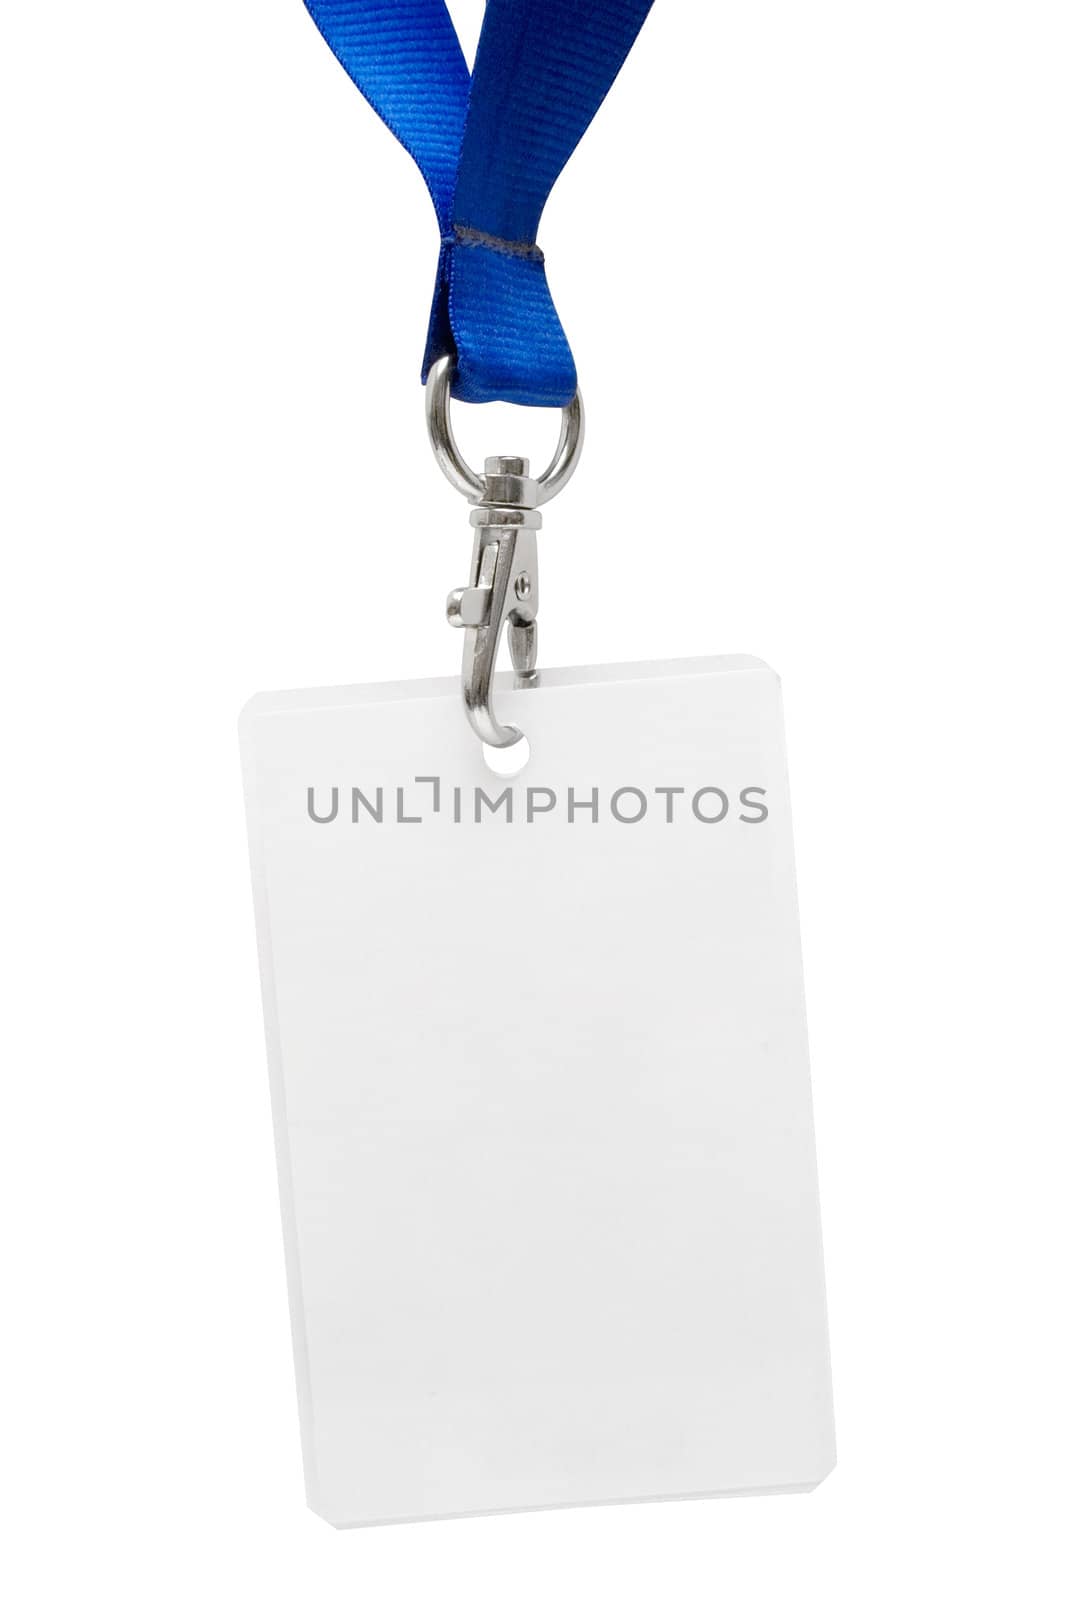 Press Pass with Clipping Path by winterling